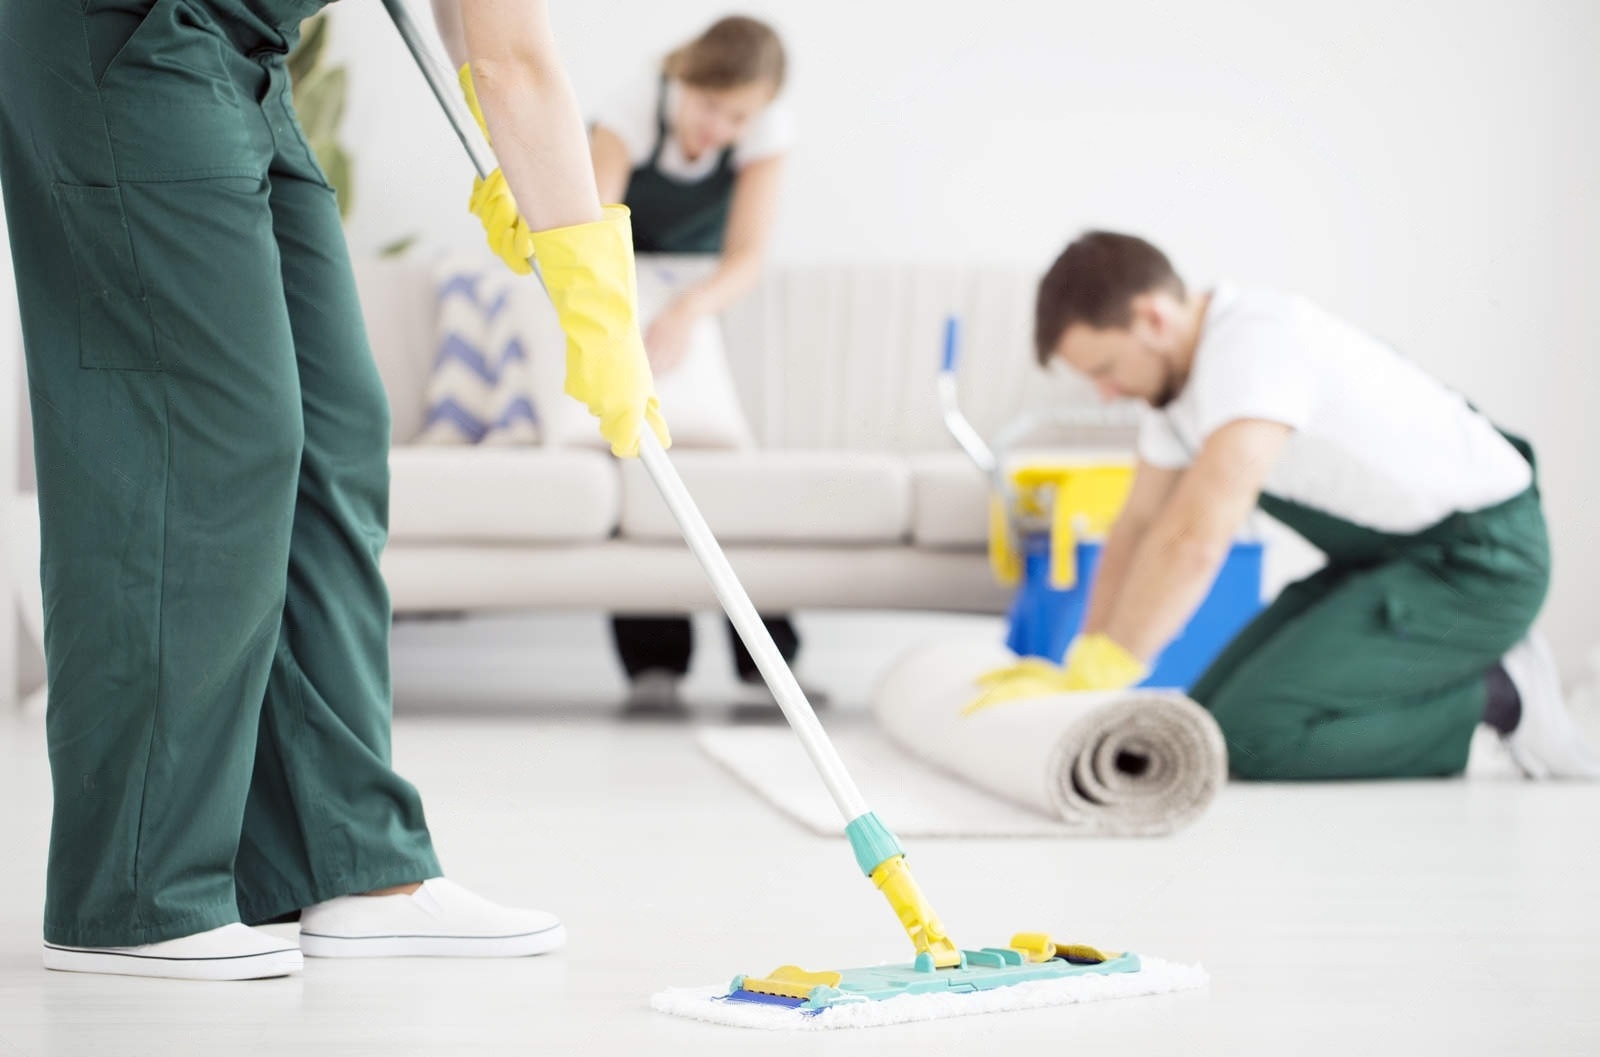 Do a deep cleaning of the home